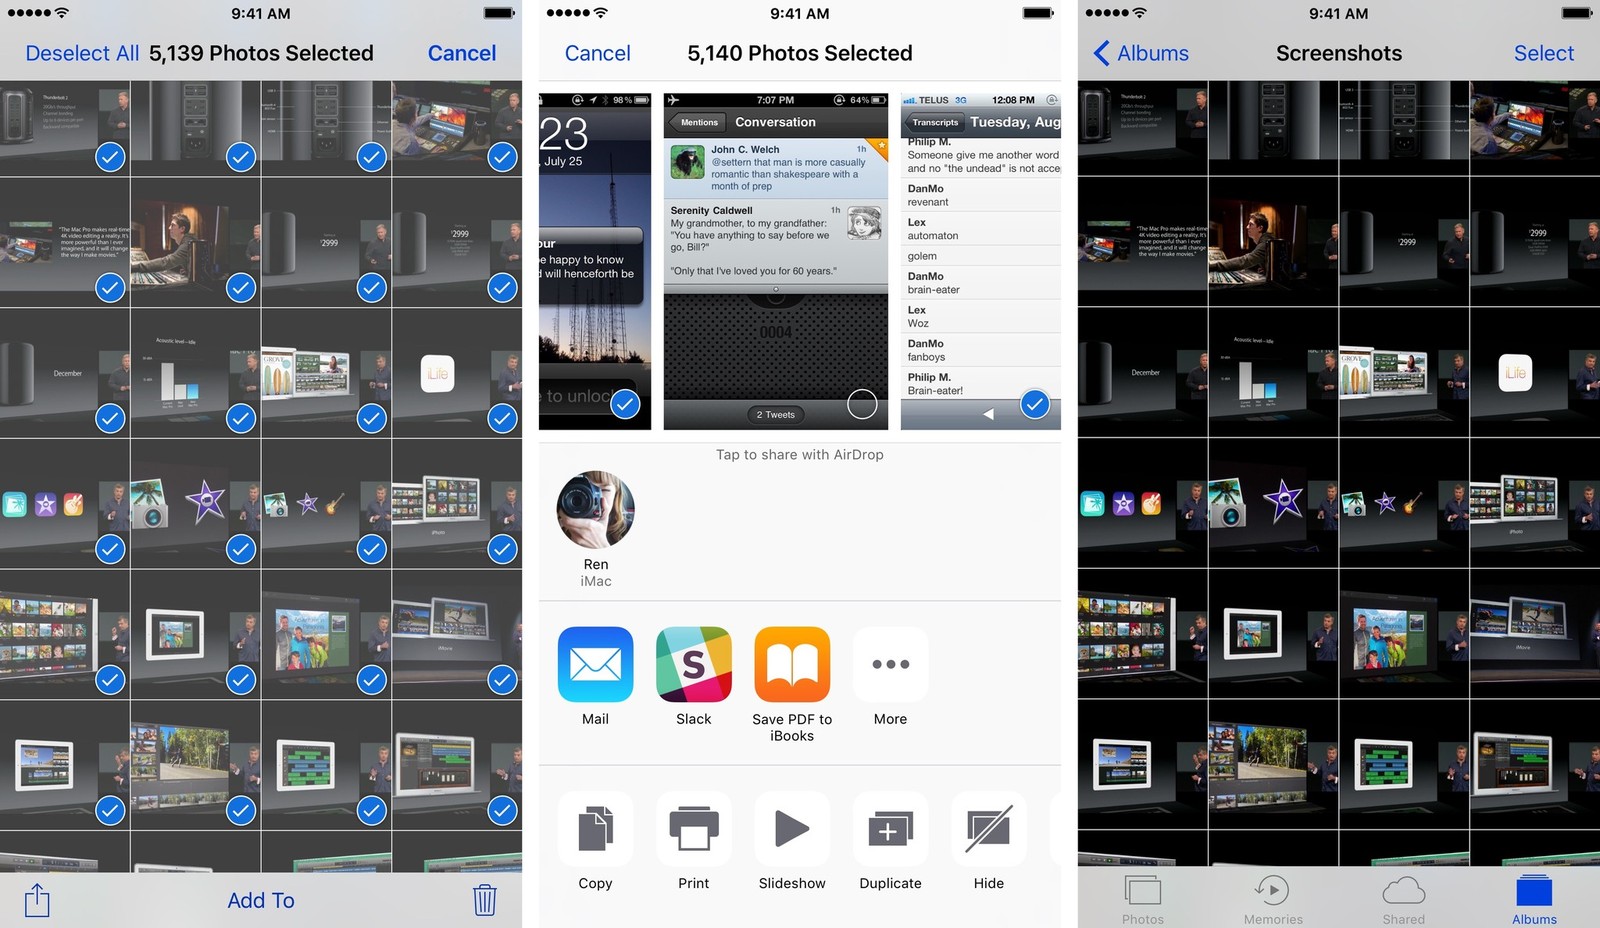 How to Hide Photos From iPhone Photos App?